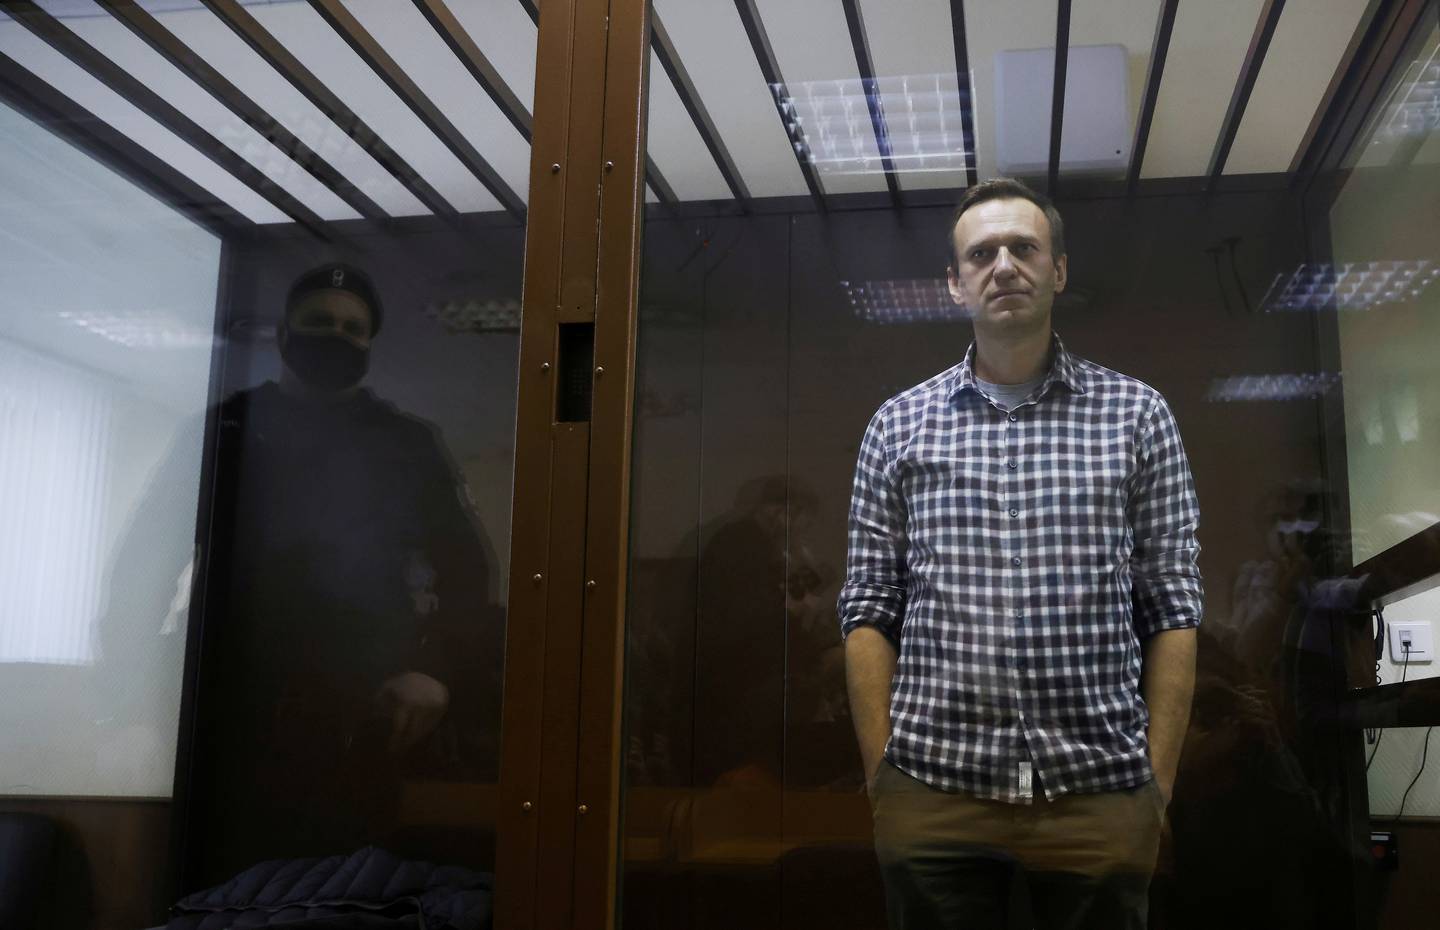 FILE PHOTO: Russian opposition leader Alexei Navalny attends a hearing to consider an appeal against an earlier court decision to change his suspended sentence to a real prison term, in Moscow, Russia February 20, 2021. REUTERS/Maxim Shemetov/File Photo